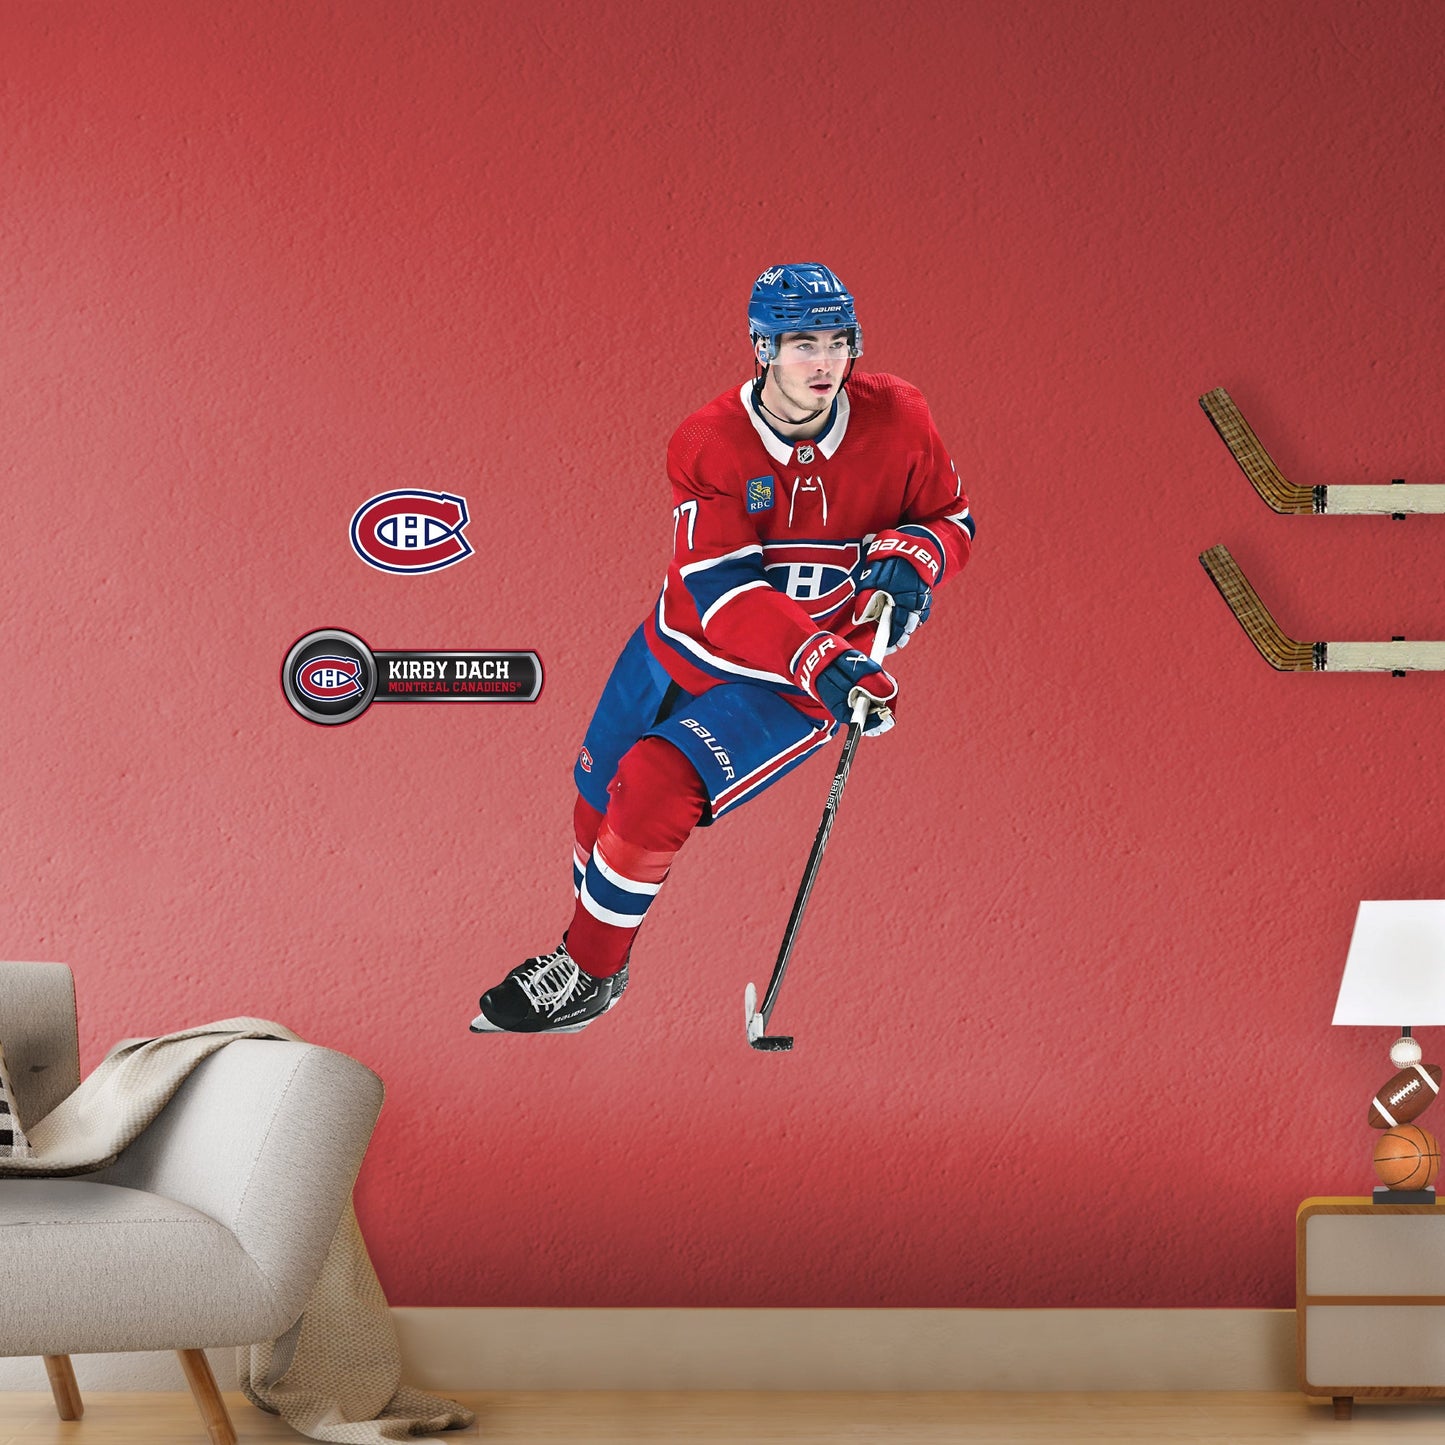 Montreal Canadiens: Kirby Dach - Officially Licensed NHL Removable Adhesive Decal